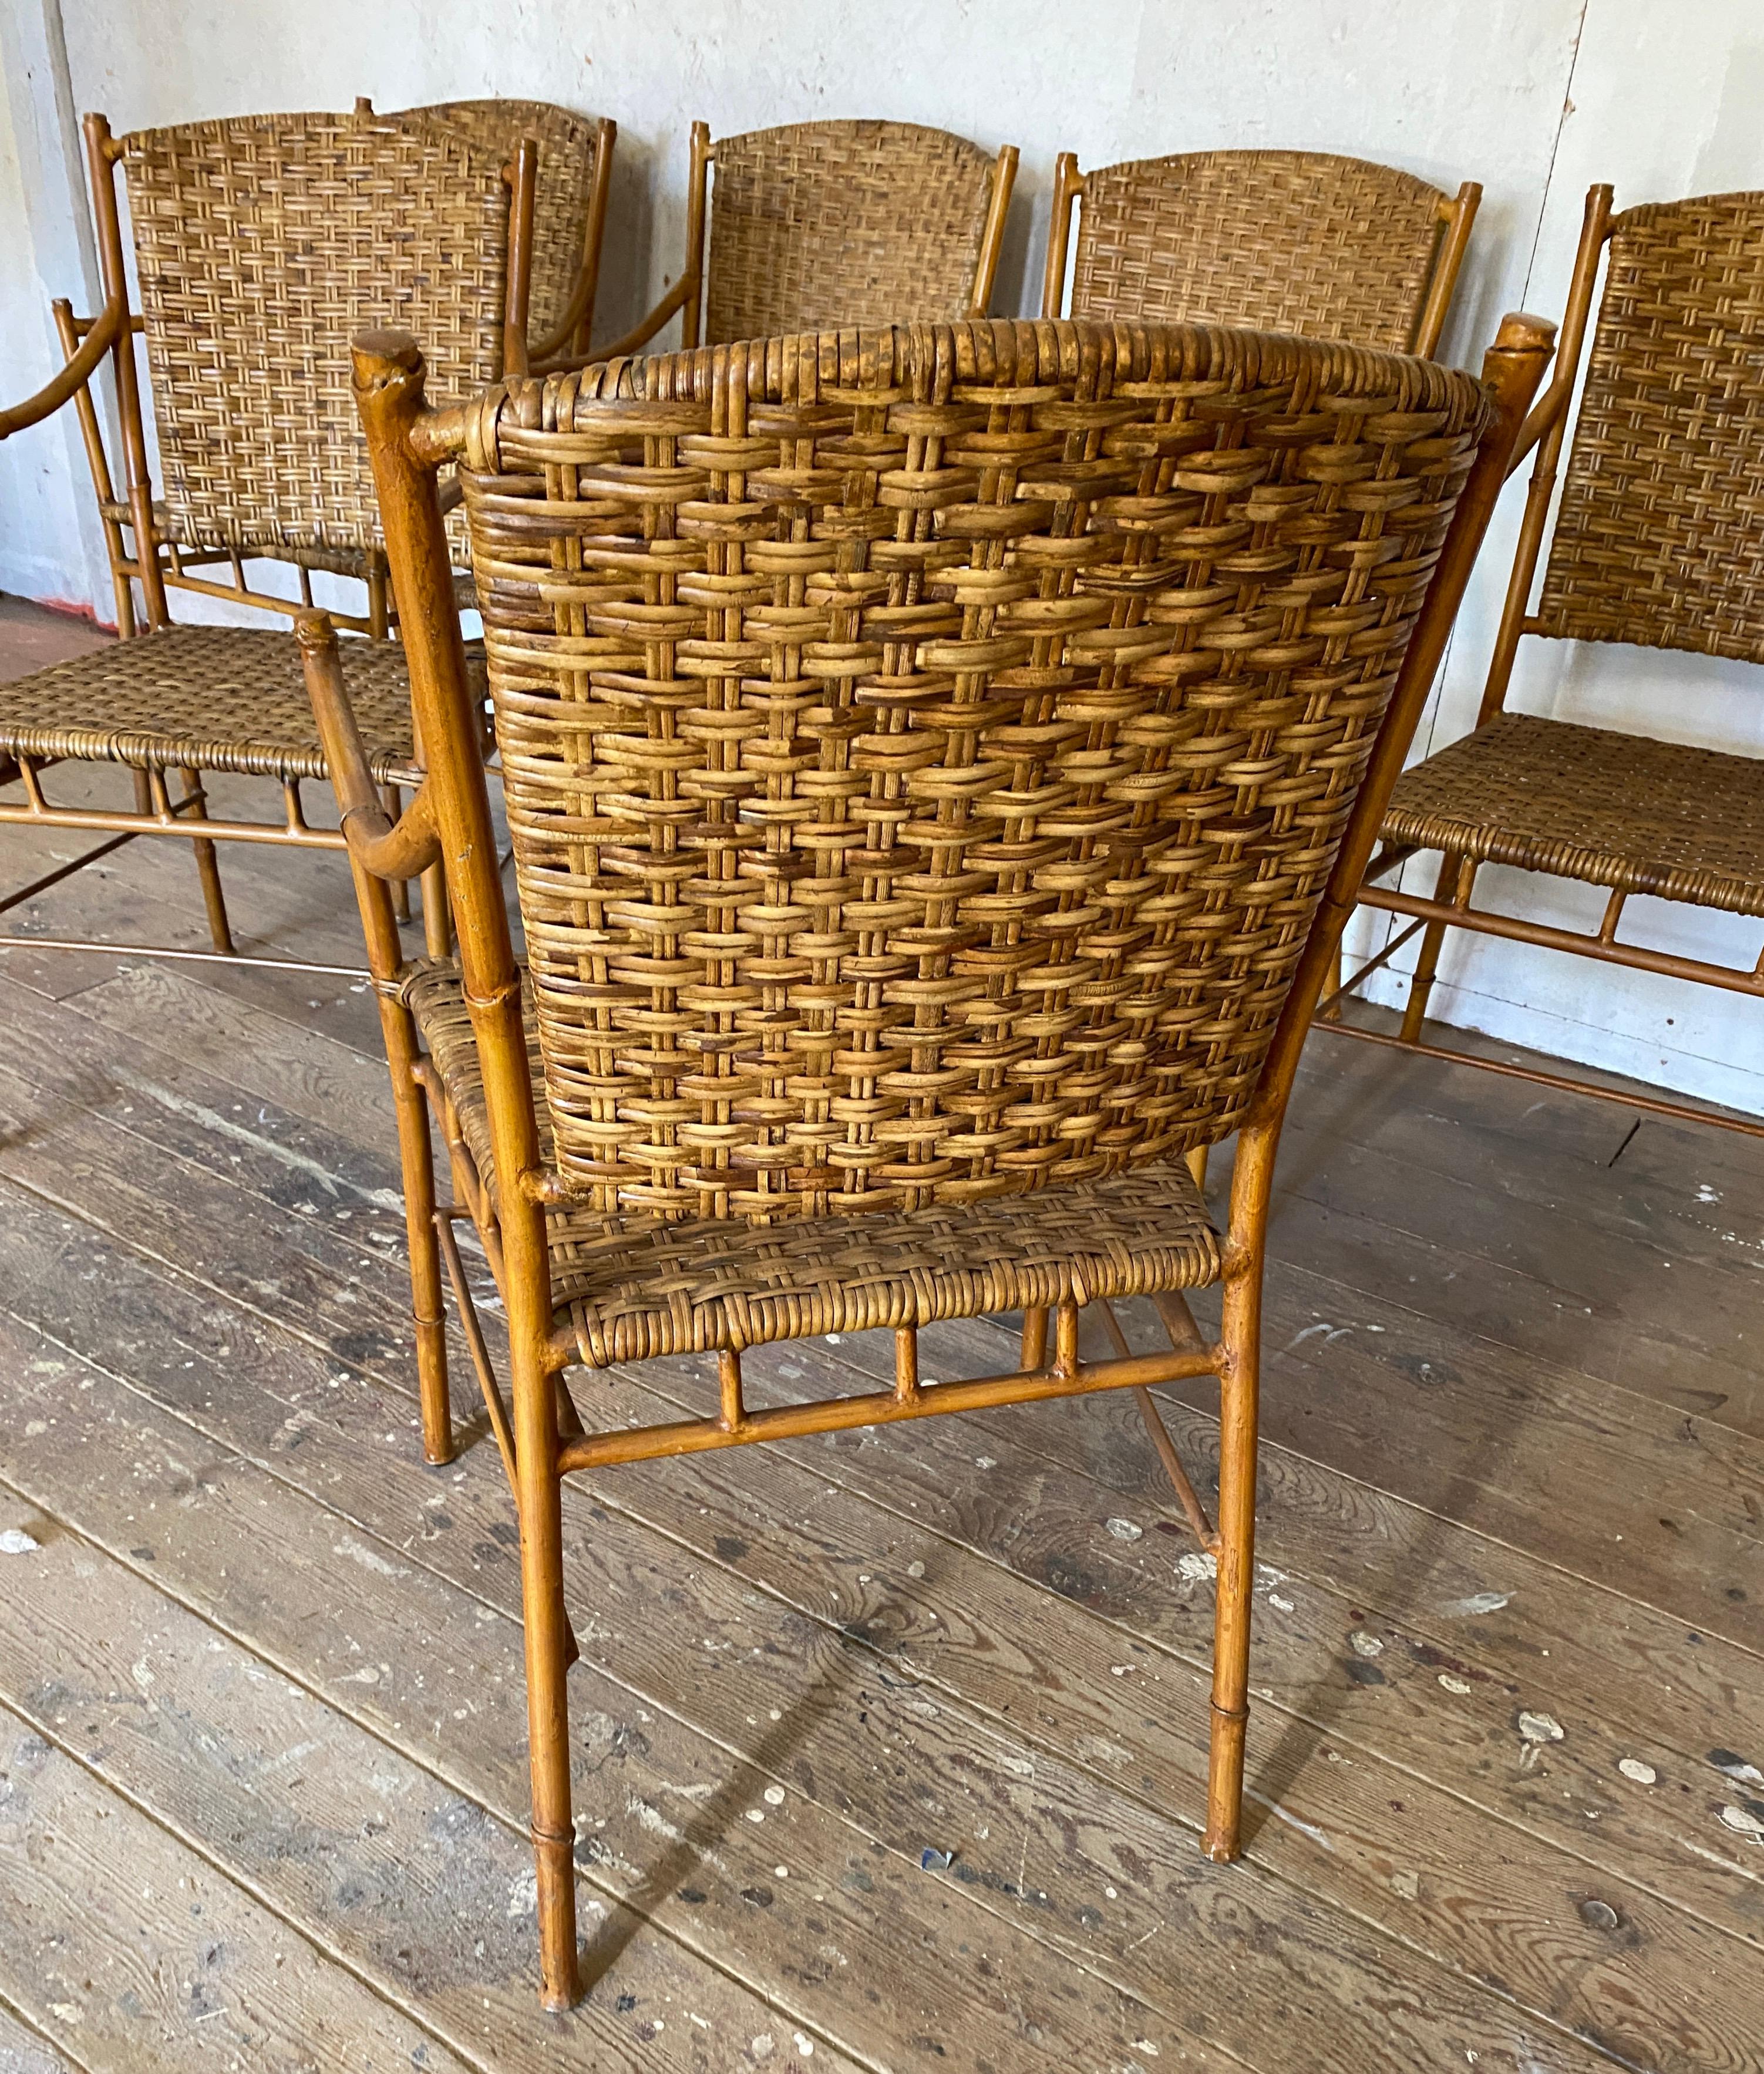 Set of 6 Mid-Century Modern dining arm chairs with great styling and comfort. The chairs are made with faux painted metal frames and woven rattan seats and backs. Use it in the dining room, kitchen table or patio or porch.
Arm height = 27